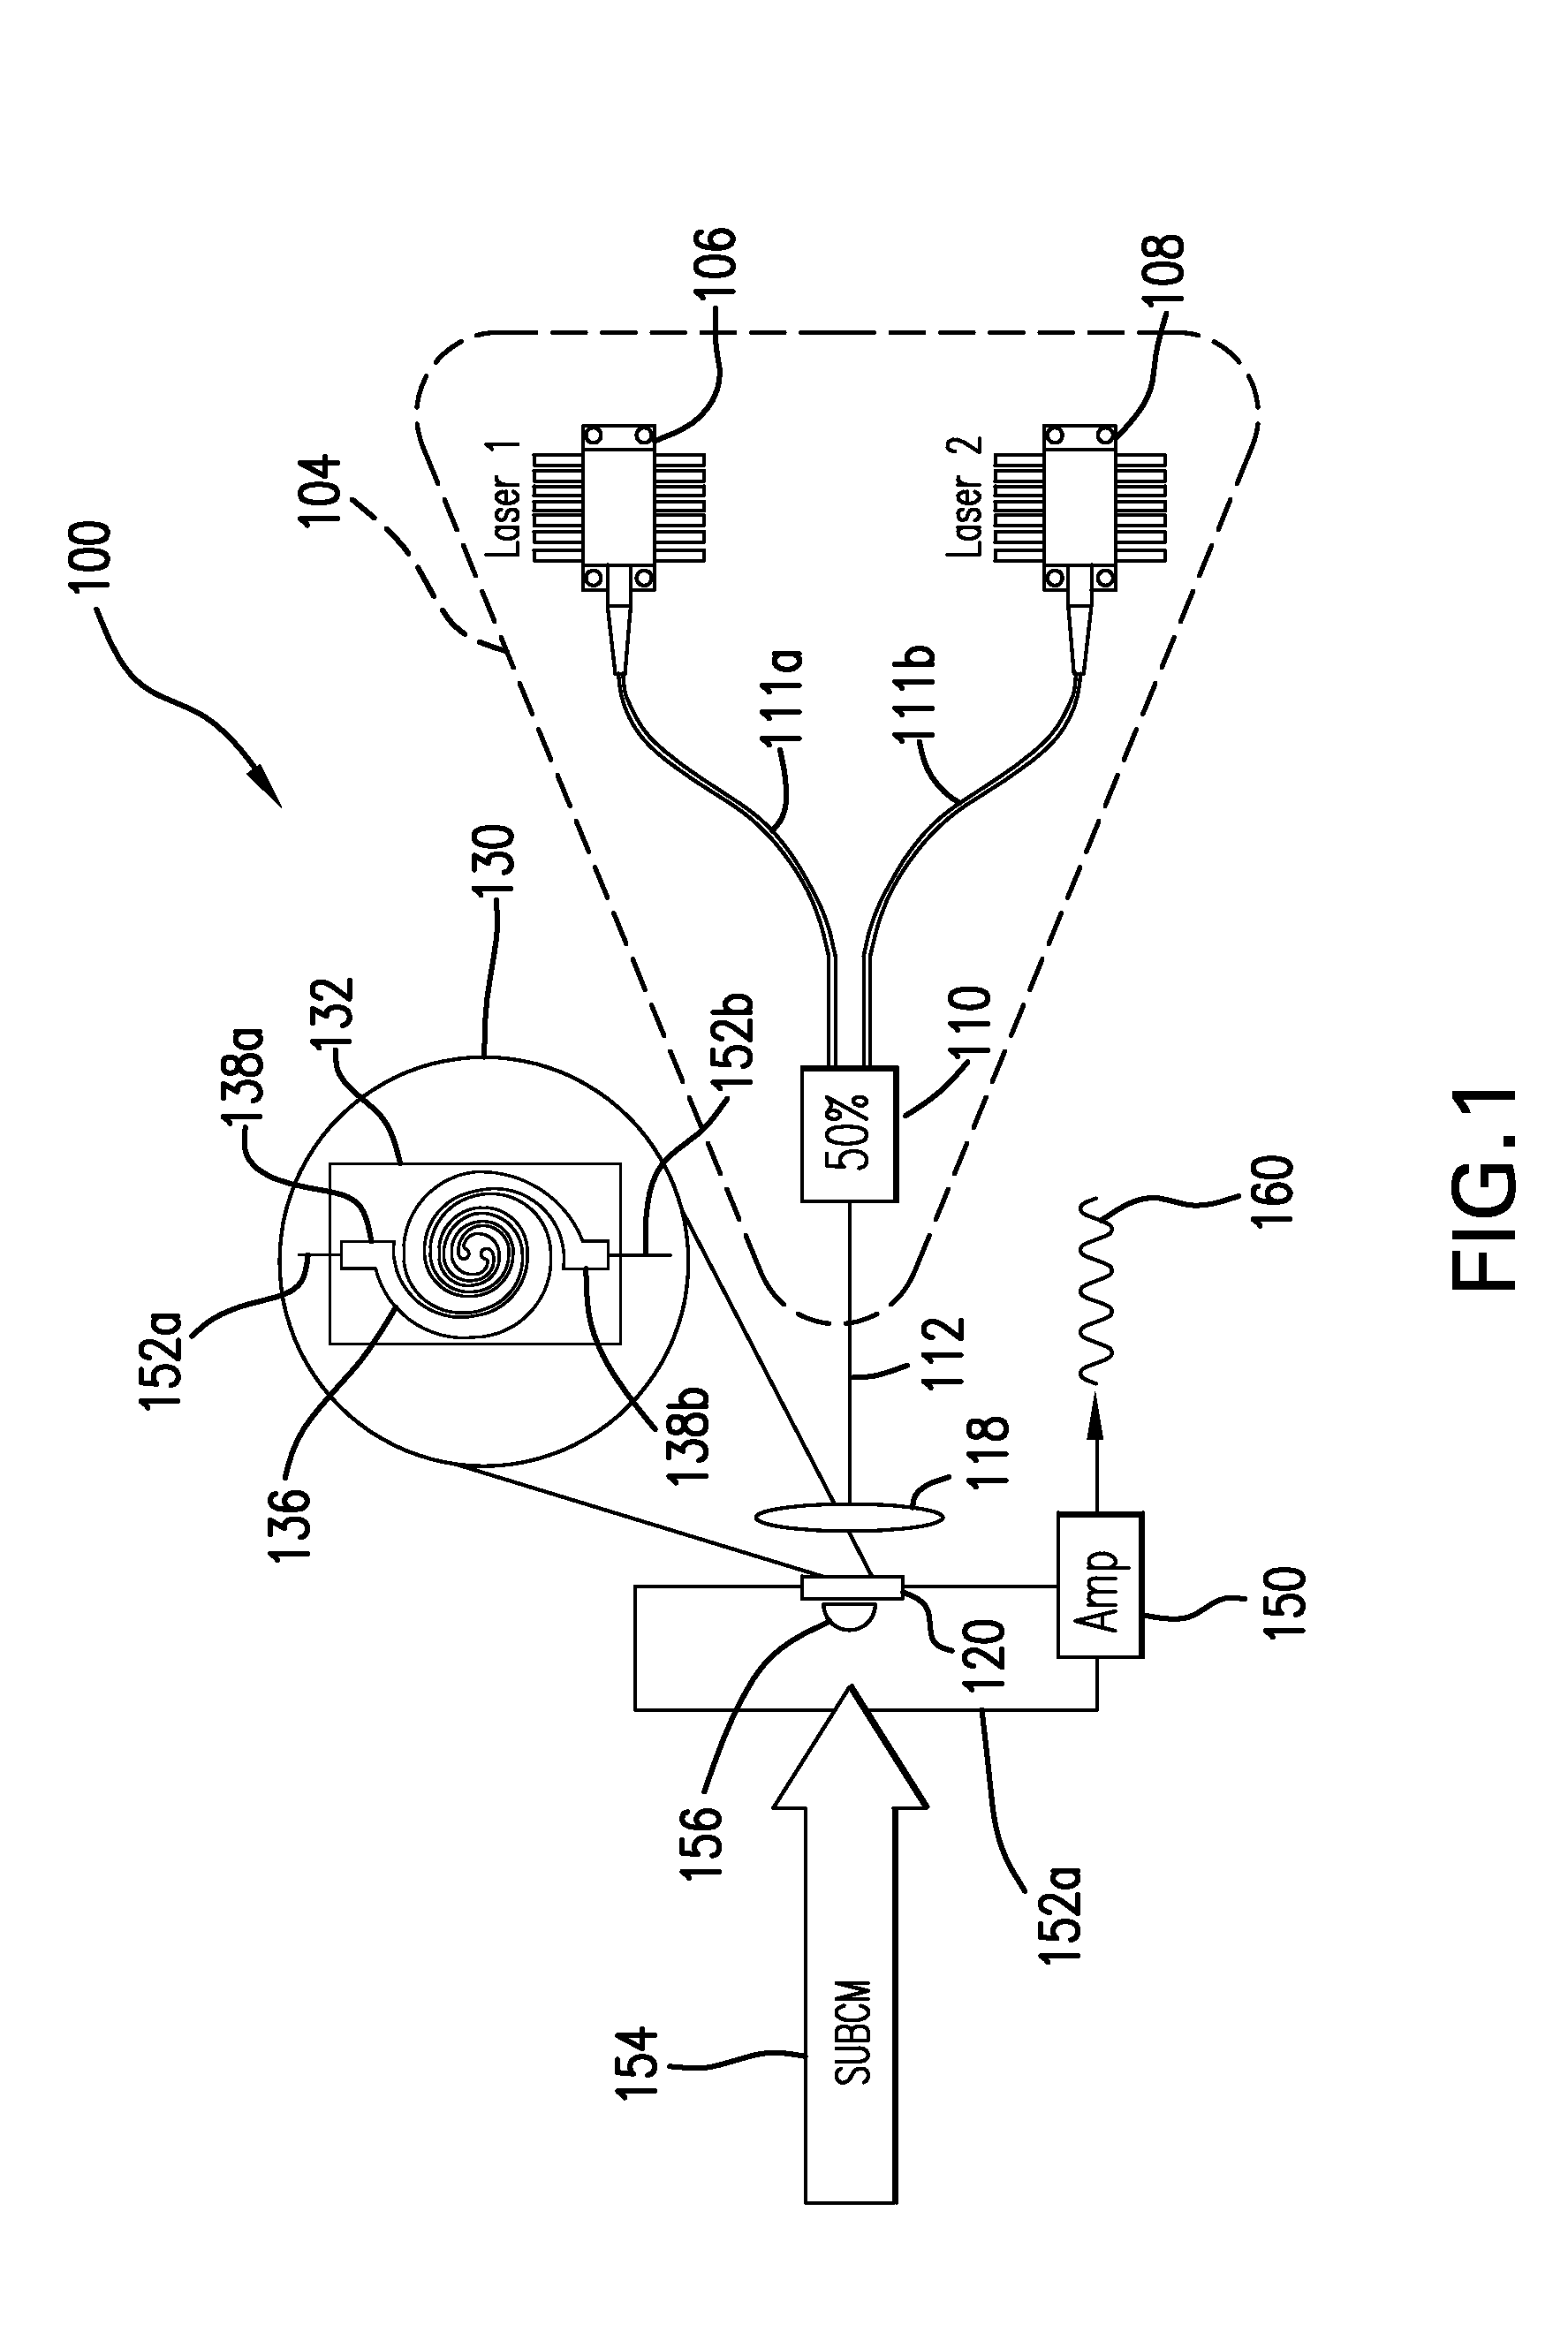 Subcentimeter radiation detection and frequency domain spectroscopy